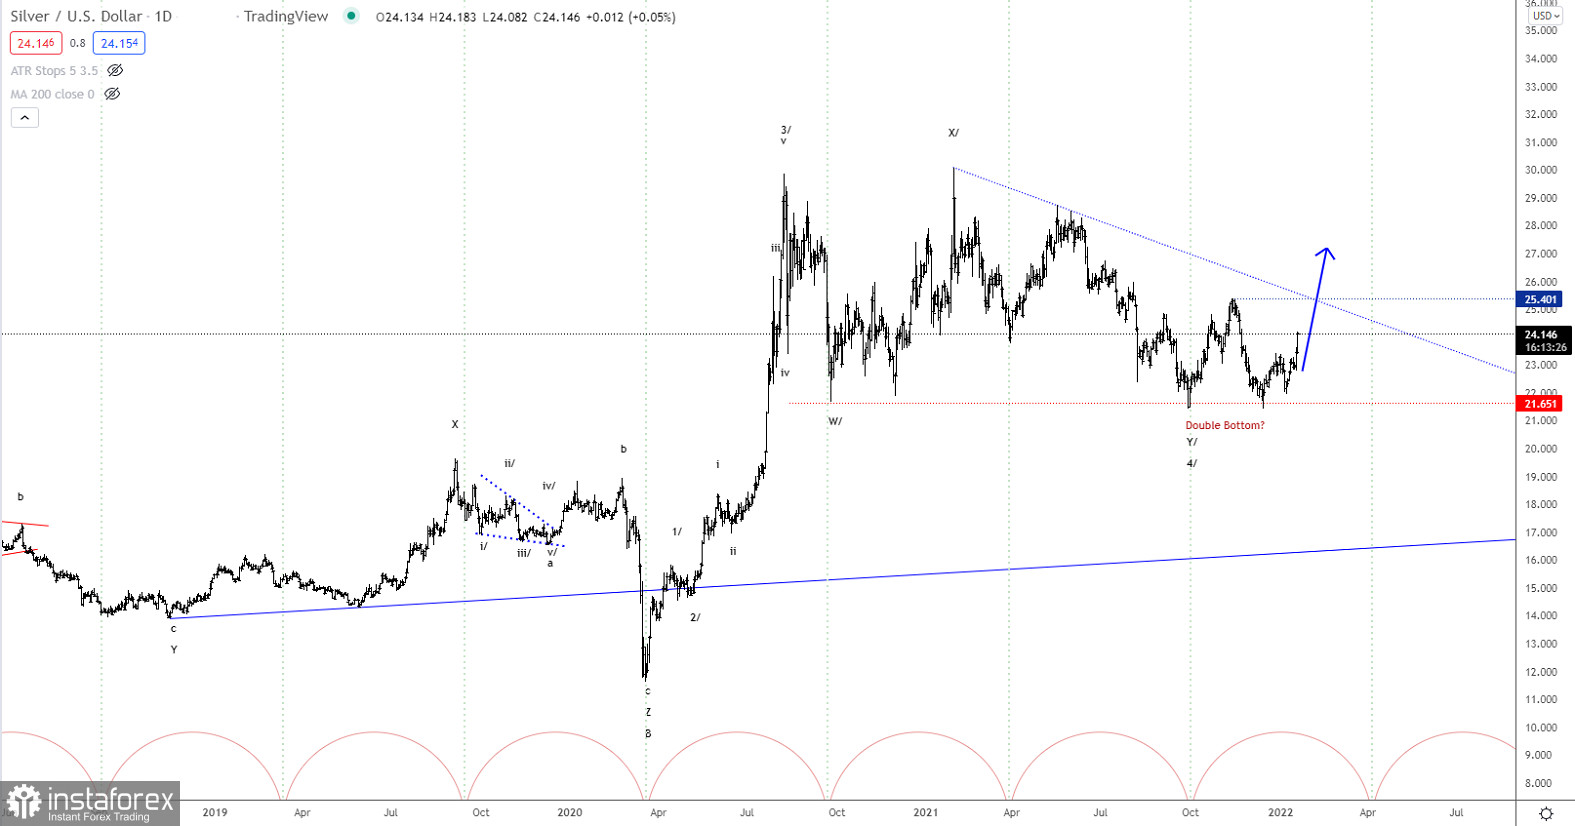 Elliott wave analysis of Silver for January 20, 2022